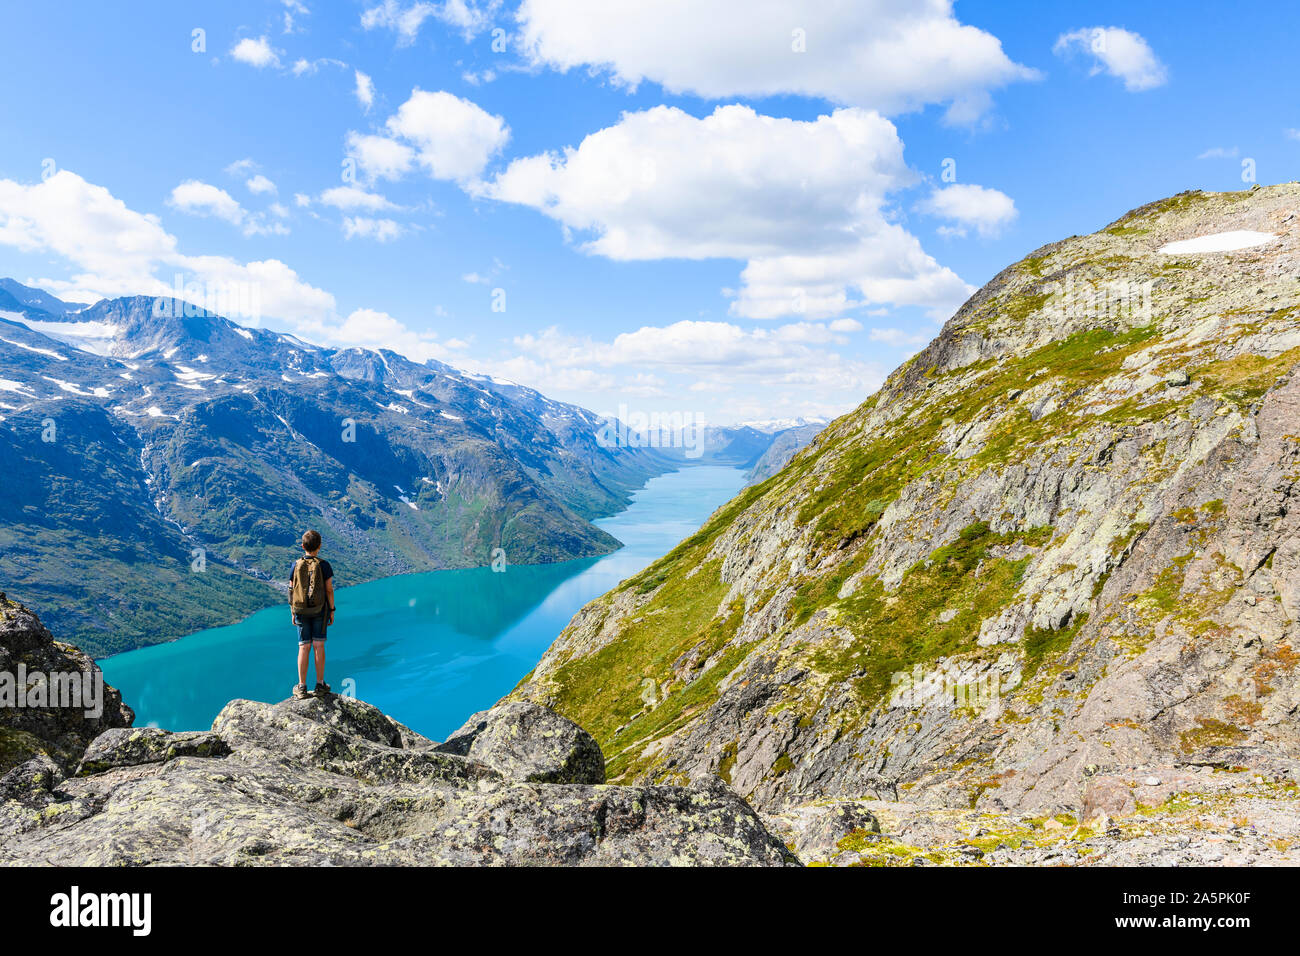 Hiker in mountains Stock Photo